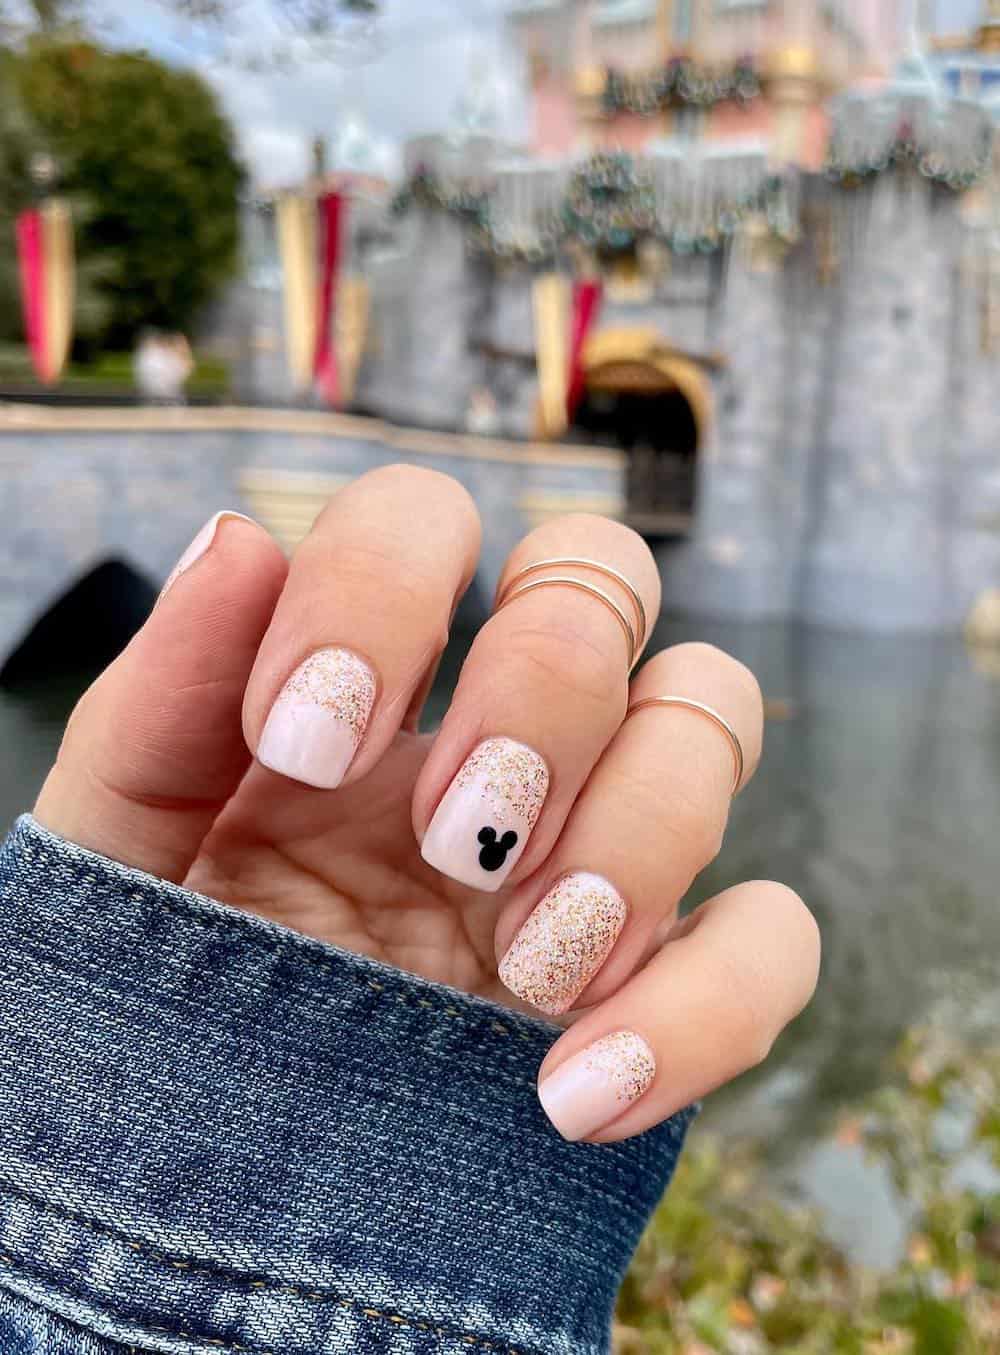 Short squoval nails with a Mickey Mouse design featuring nude pink and gold glitter